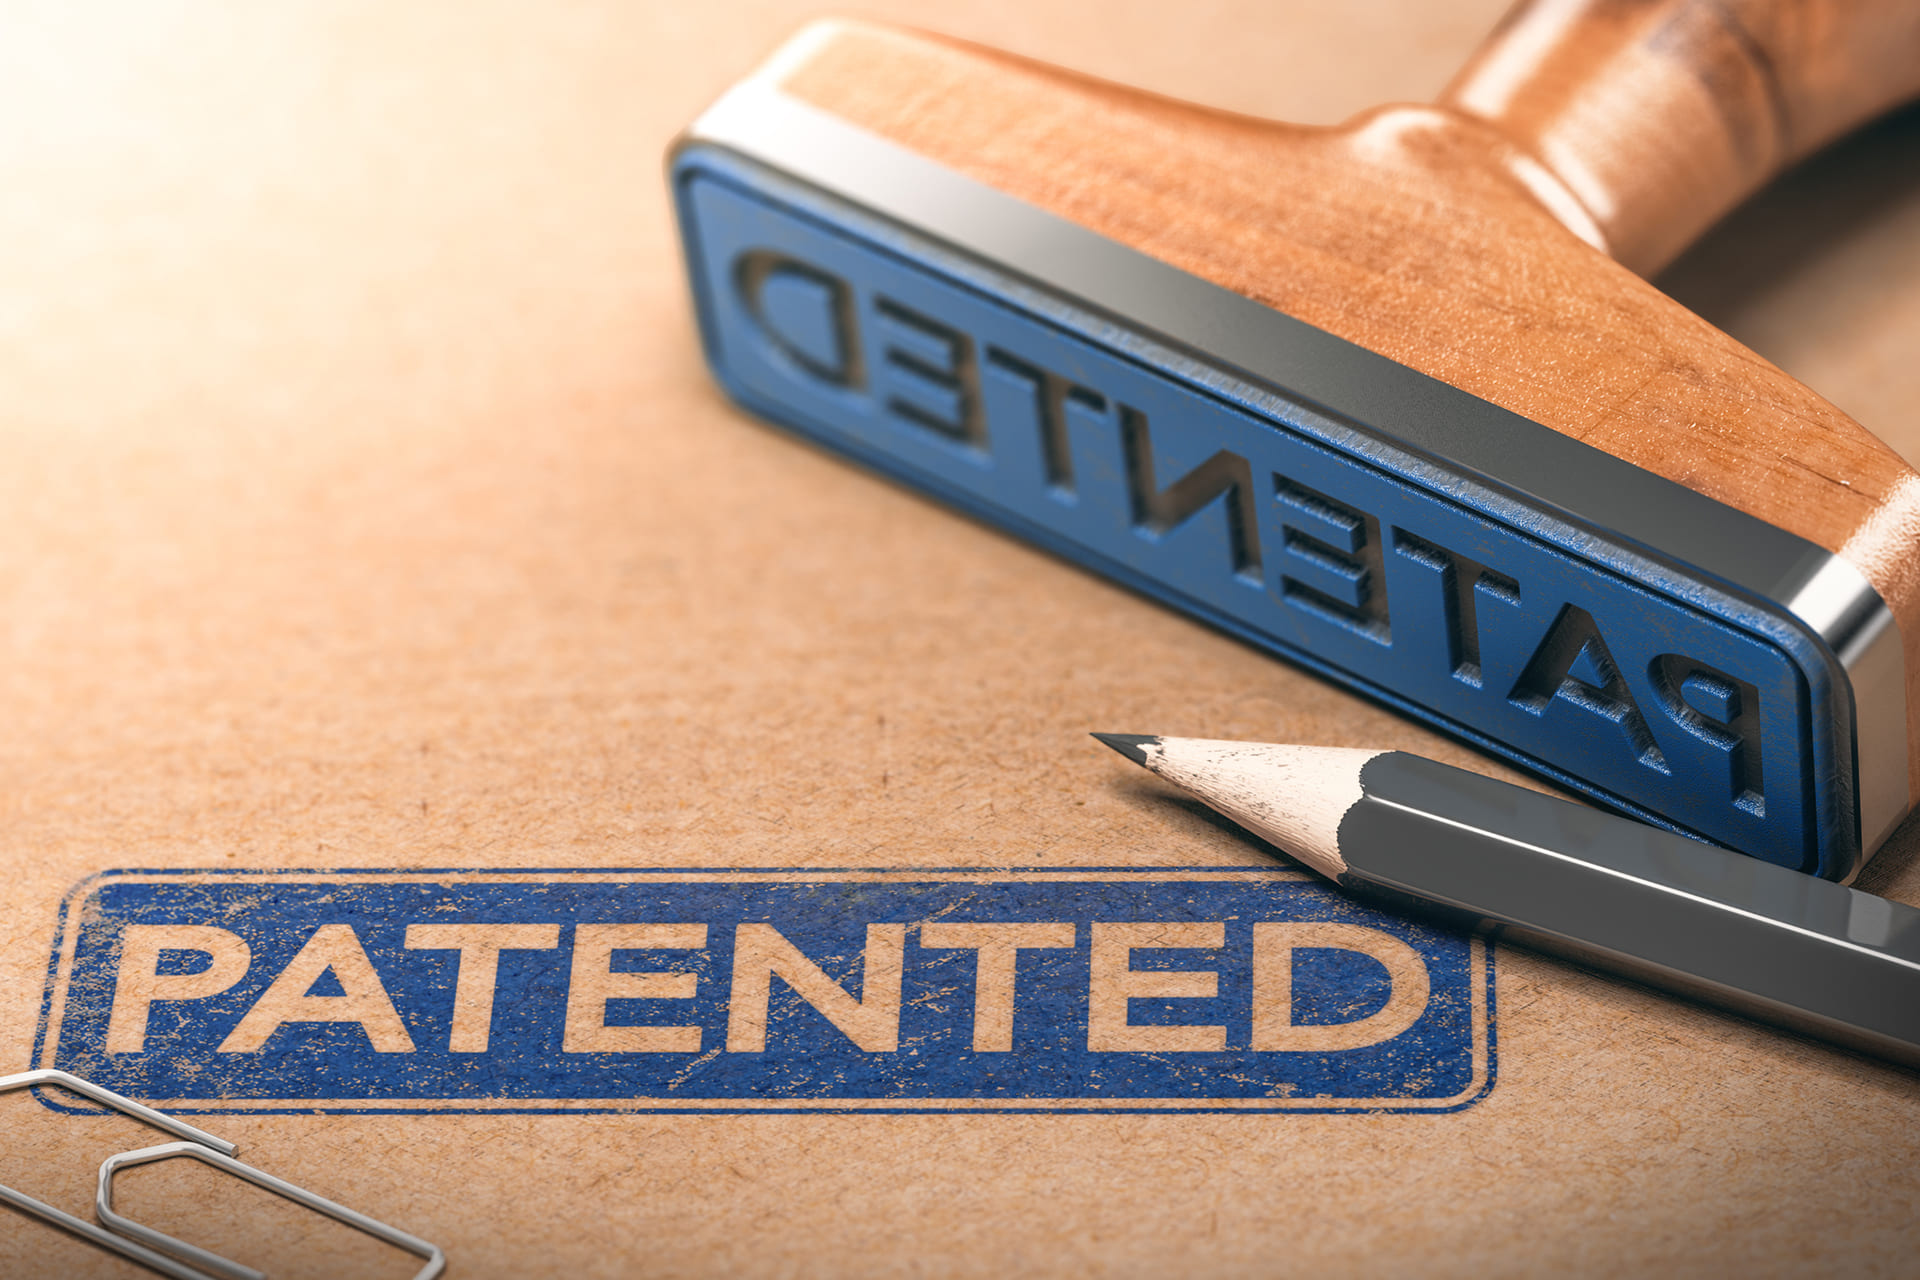 It s Official: European Unitary Patent and Unified Patent Court Arrive